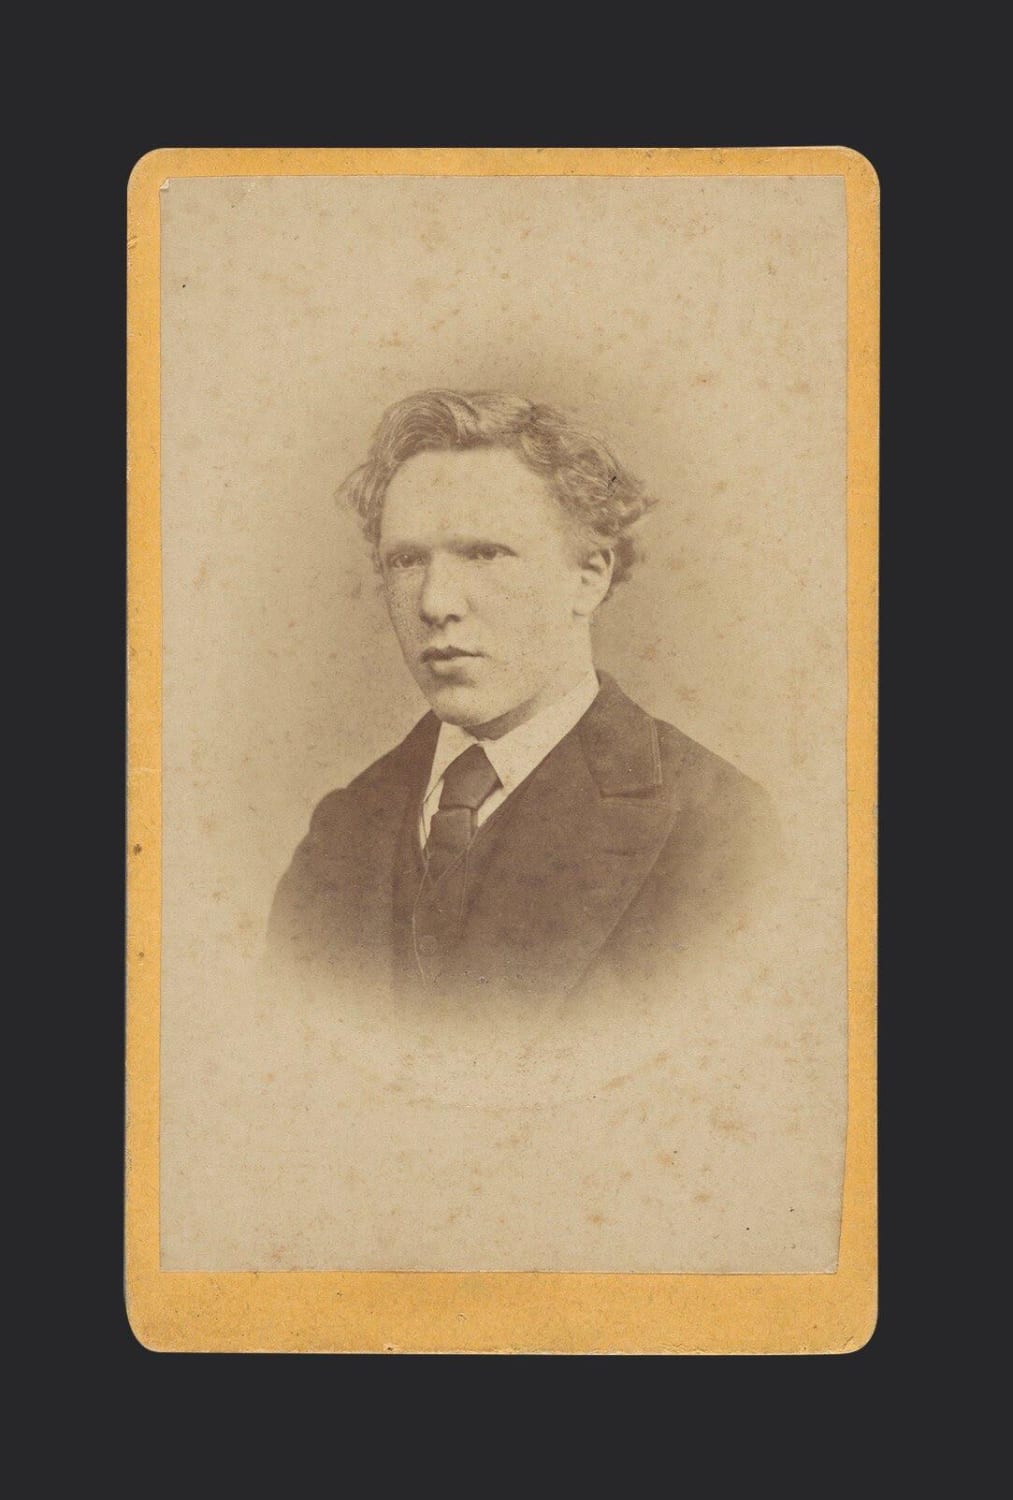 Vincent van Gogh, in the only known photo of him, at 19 taken by Jacobus Marinus Wilhelmus de Louw in 1872